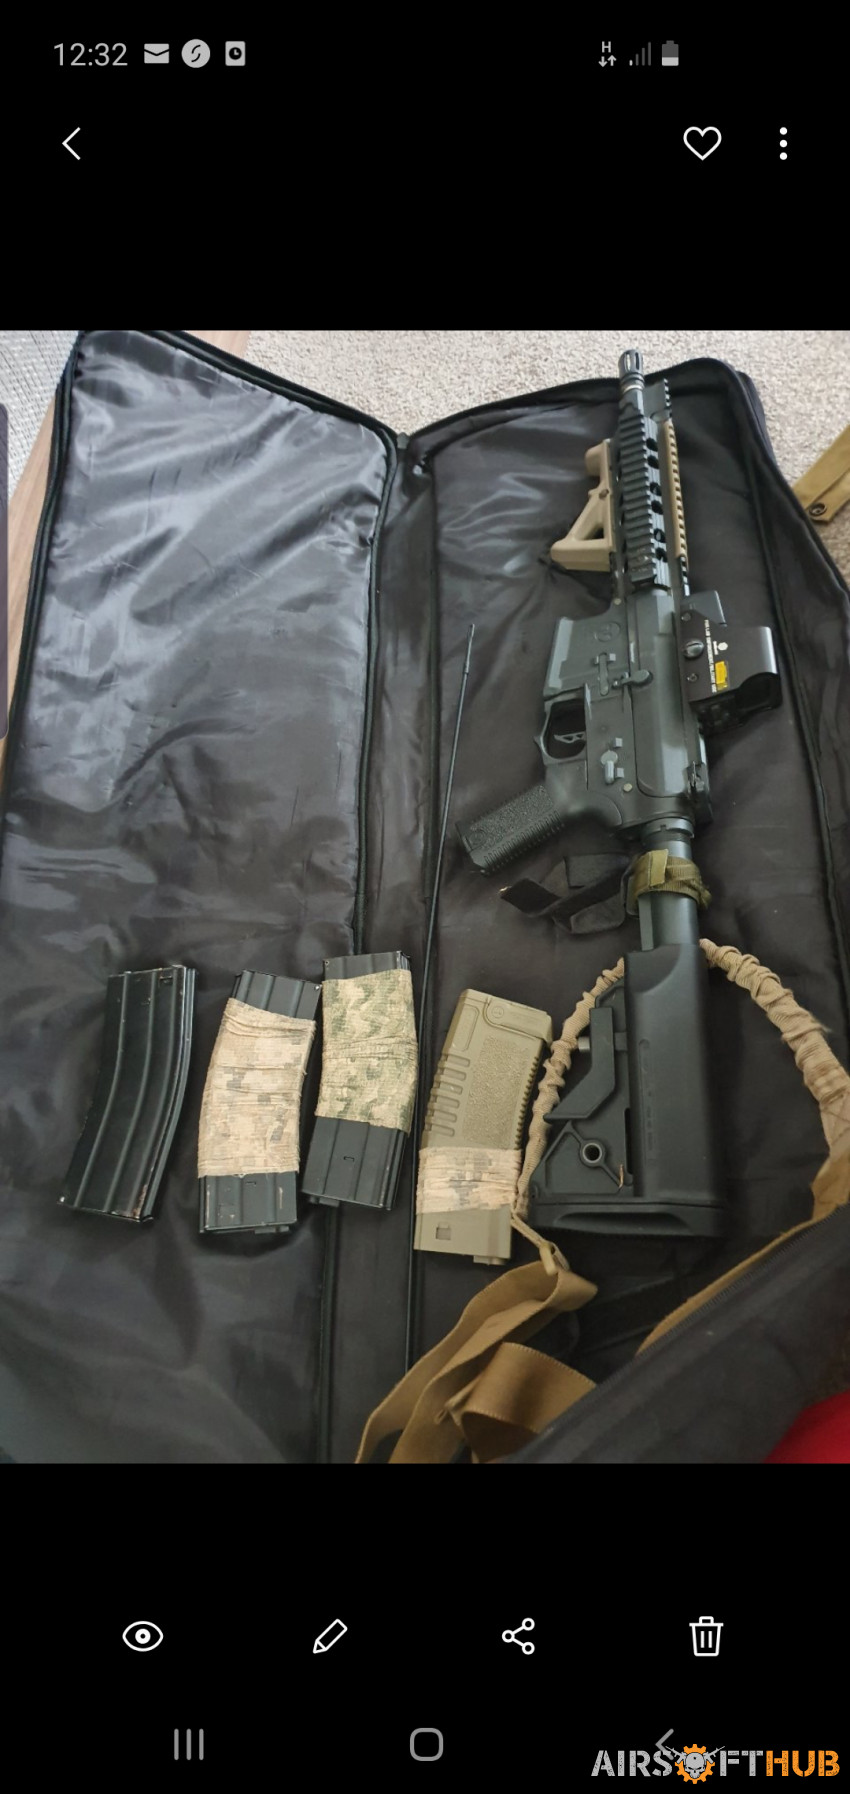 Aries omega - Used airsoft equipment